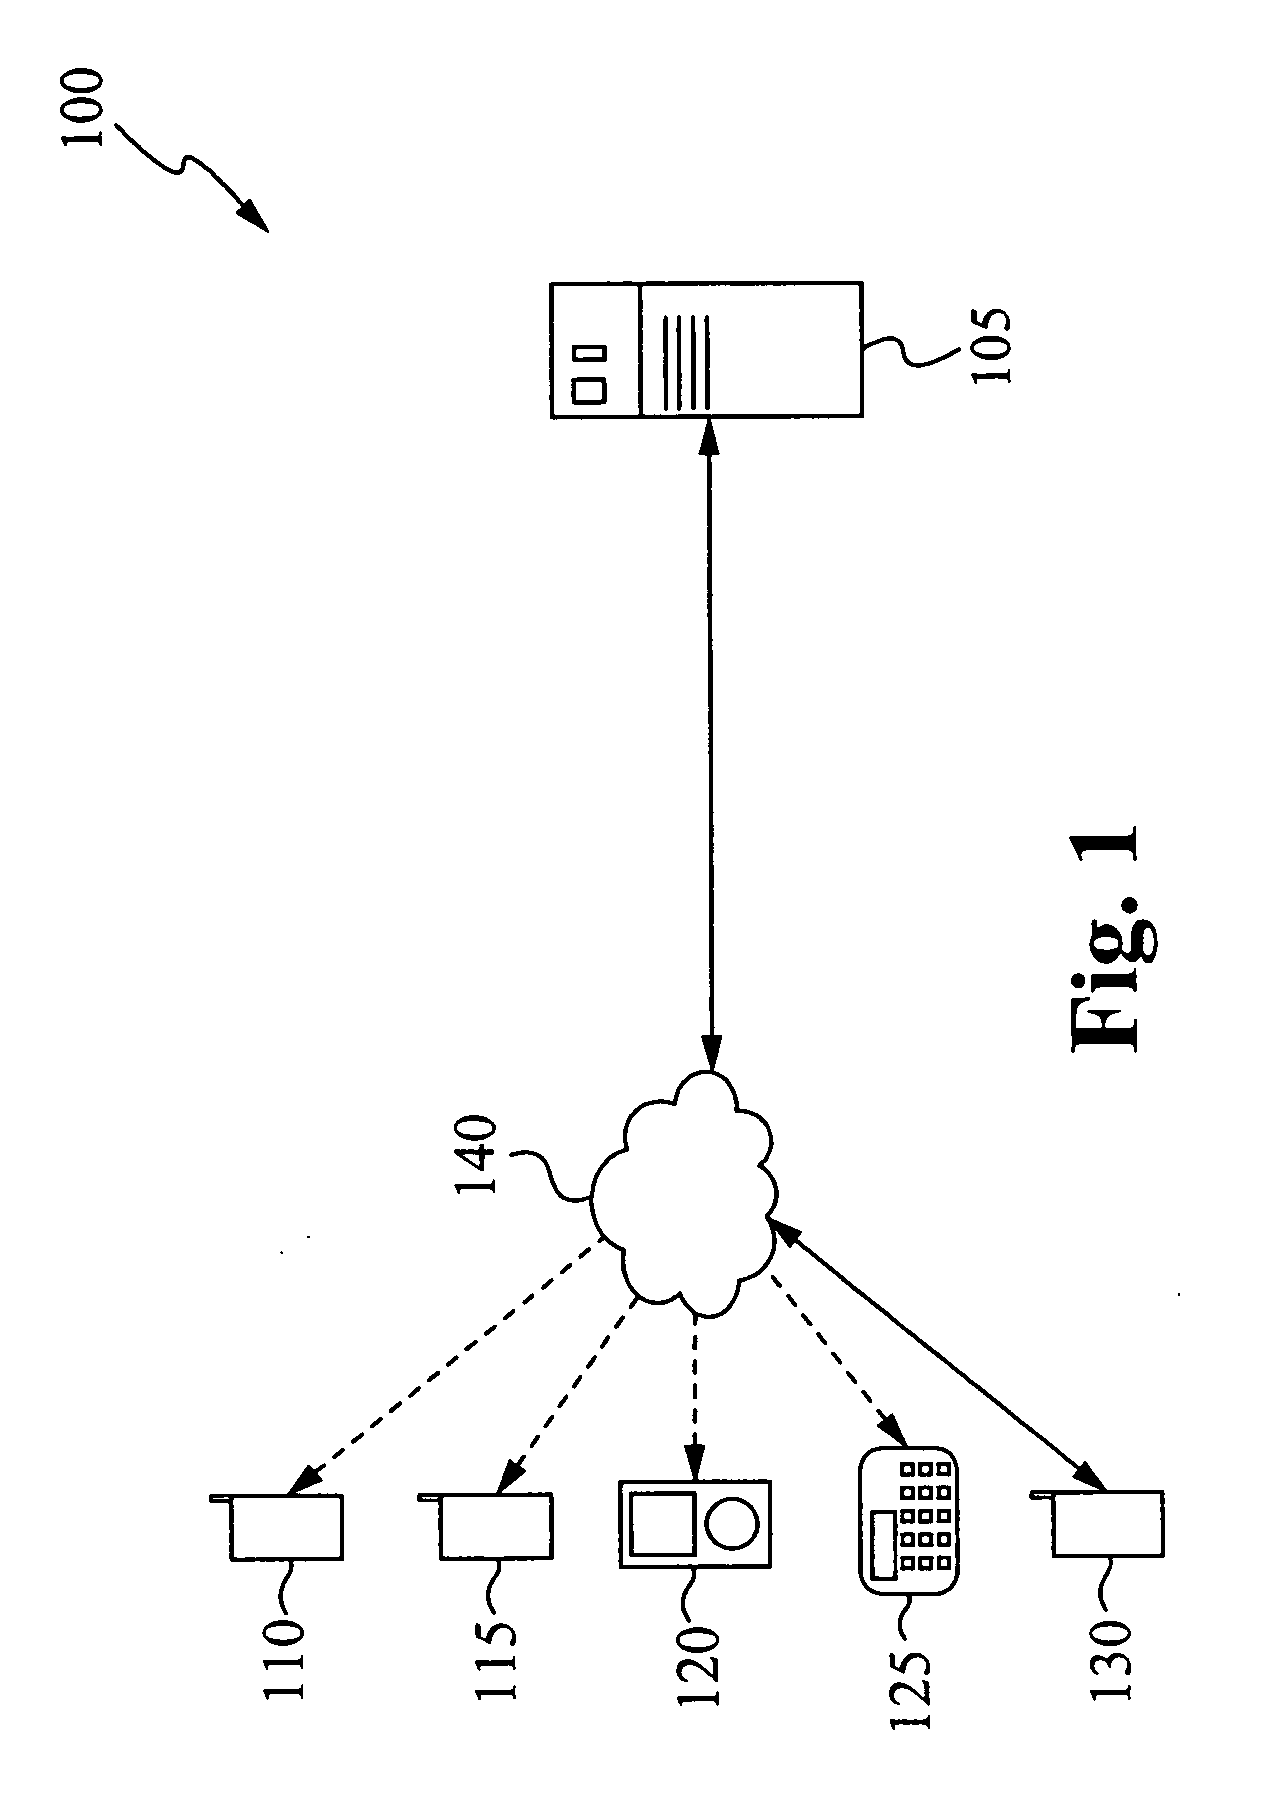 Methods and apparatus for distributed gaming over a mobile device